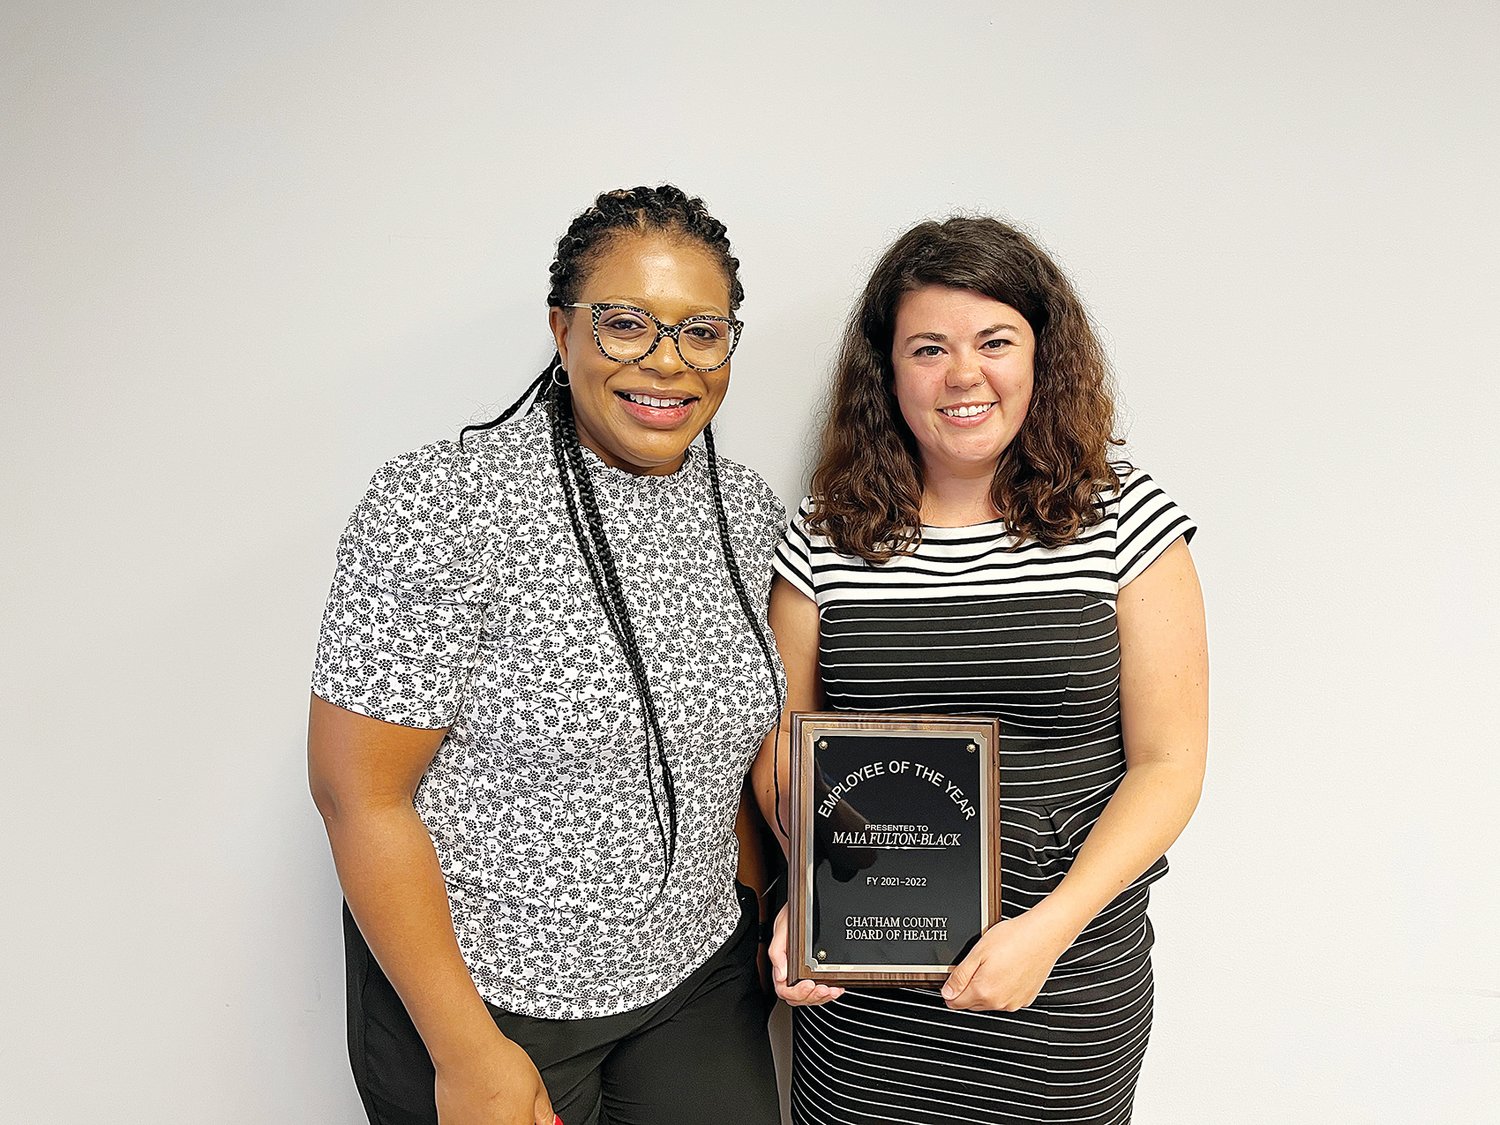 Maia Fulton-Black, right, receives the 2021-22 Chatham County Board of Health Employee of the Year award from Dr. Karen Barbee, chairperson of the Chatham County Board of Health, last Monday in Pittsboro.